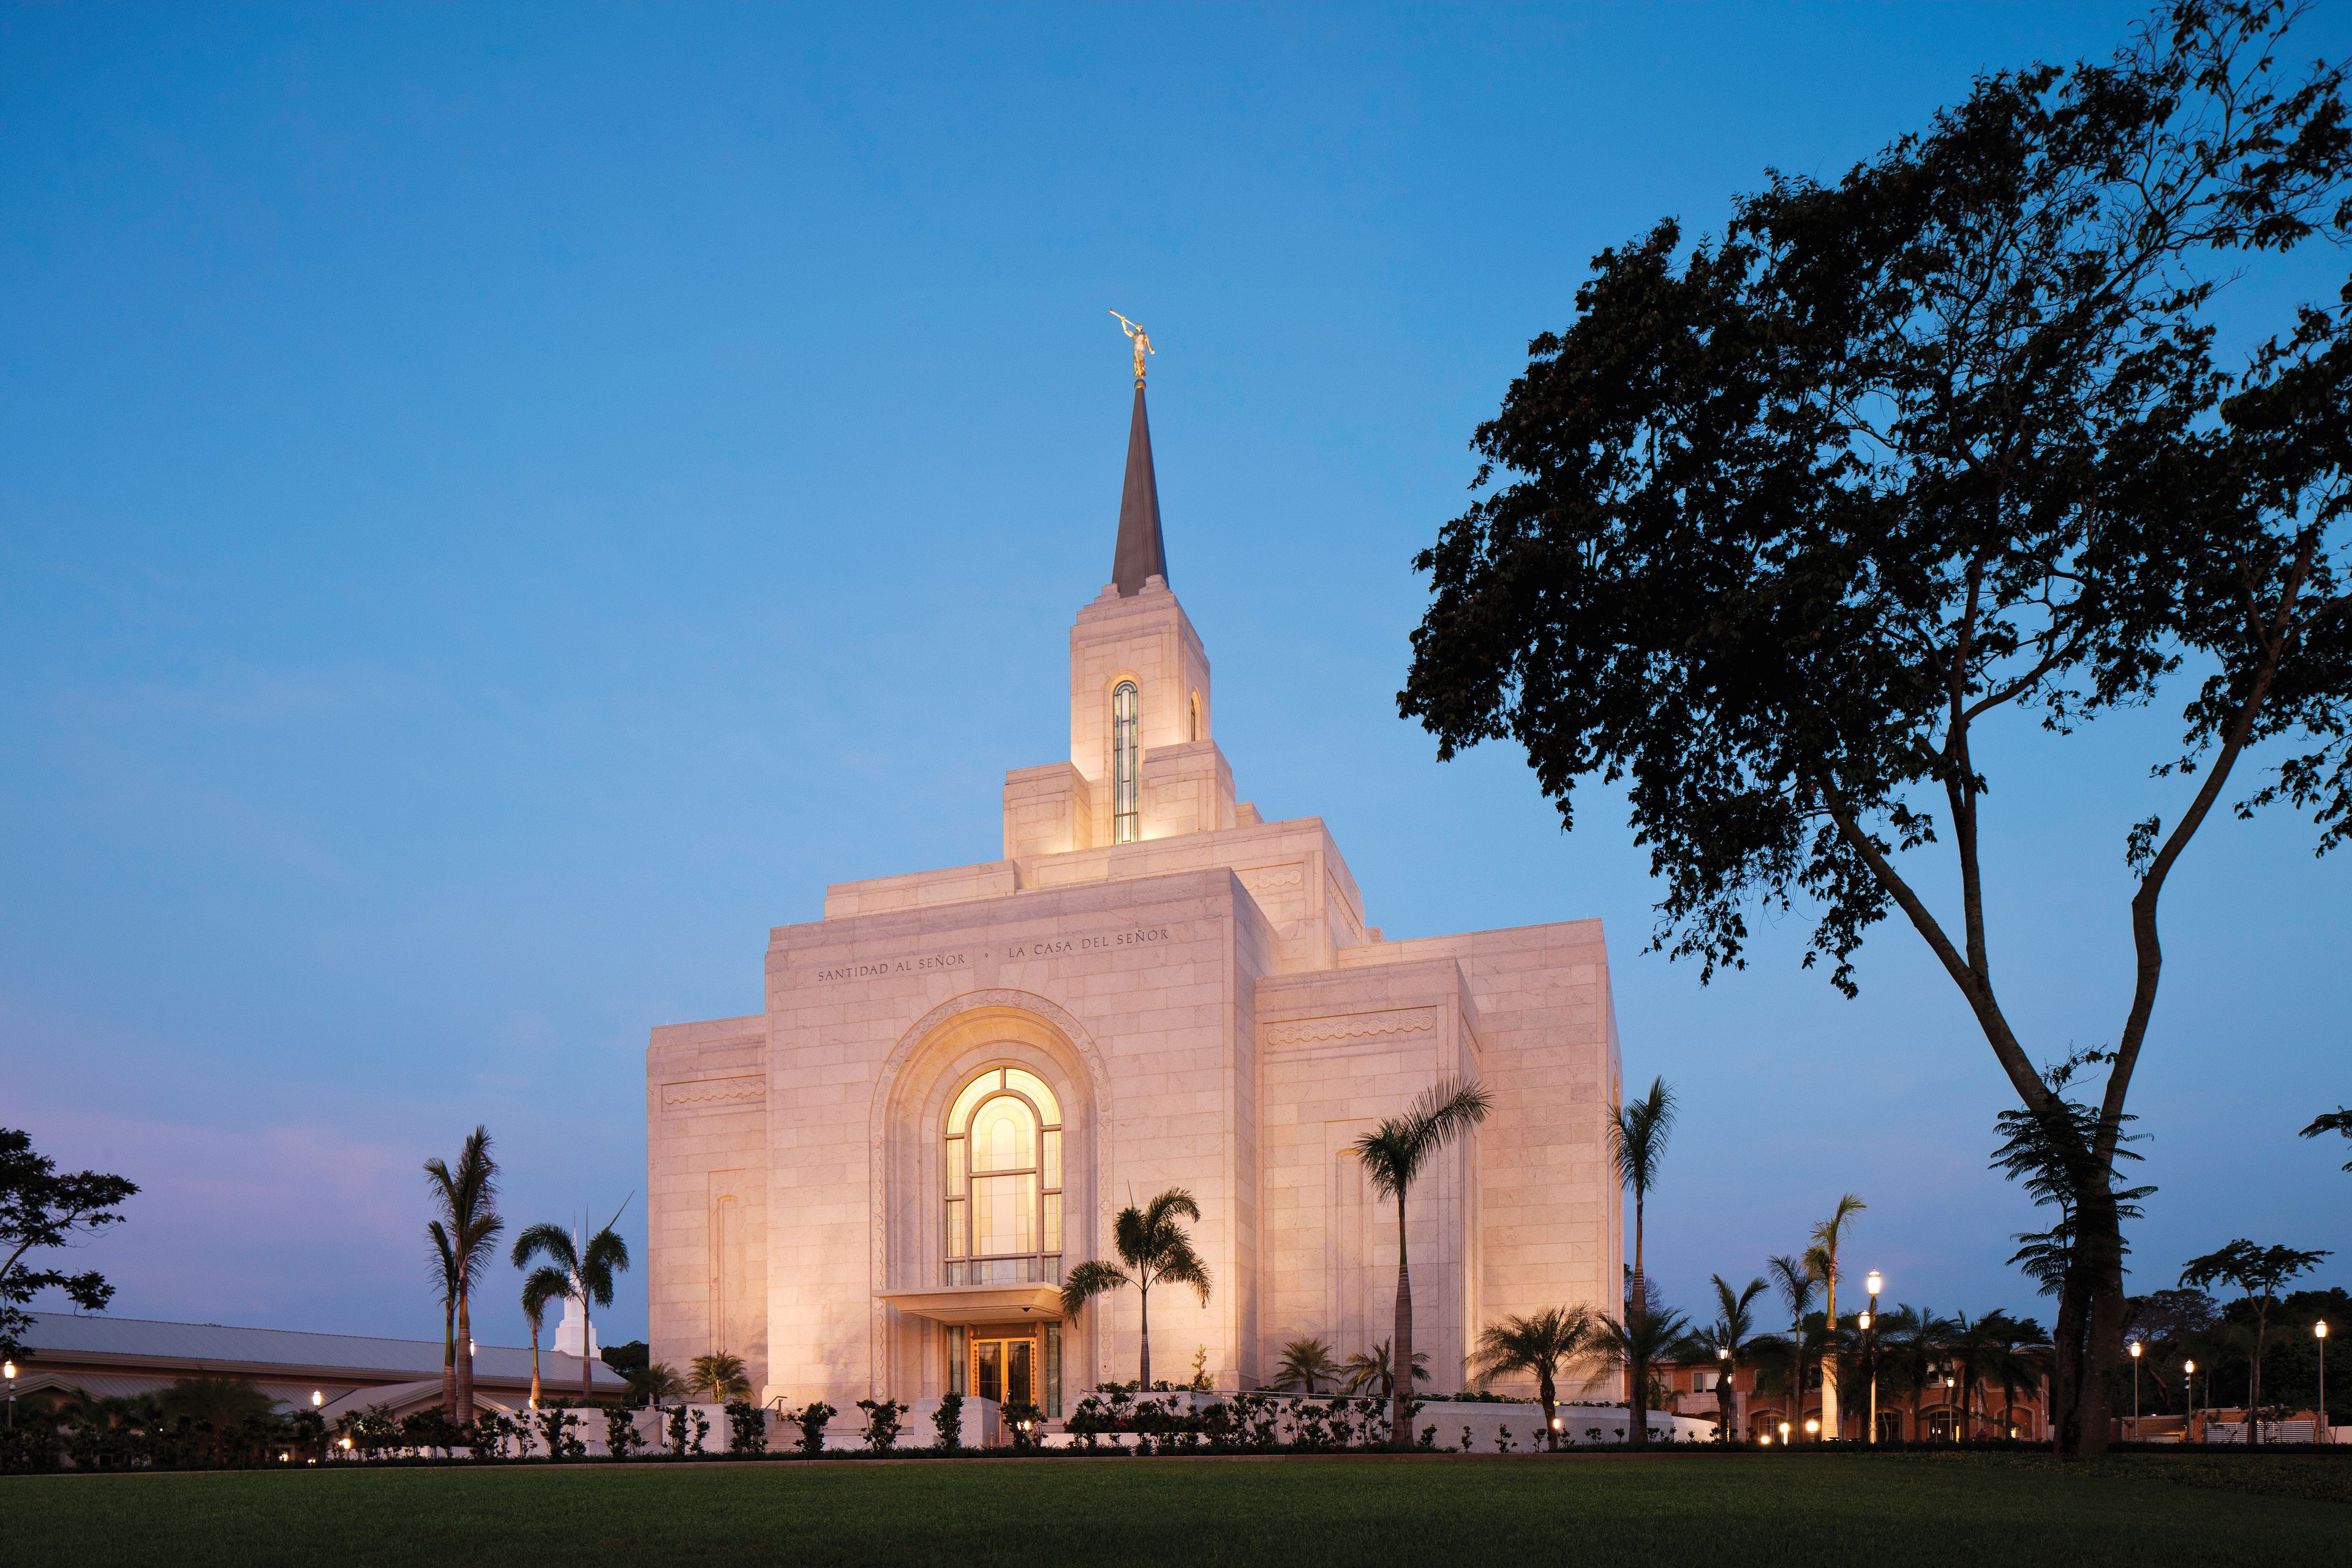 The San Salvador El Salvador Temple in the evening, including the entrance and scenery.